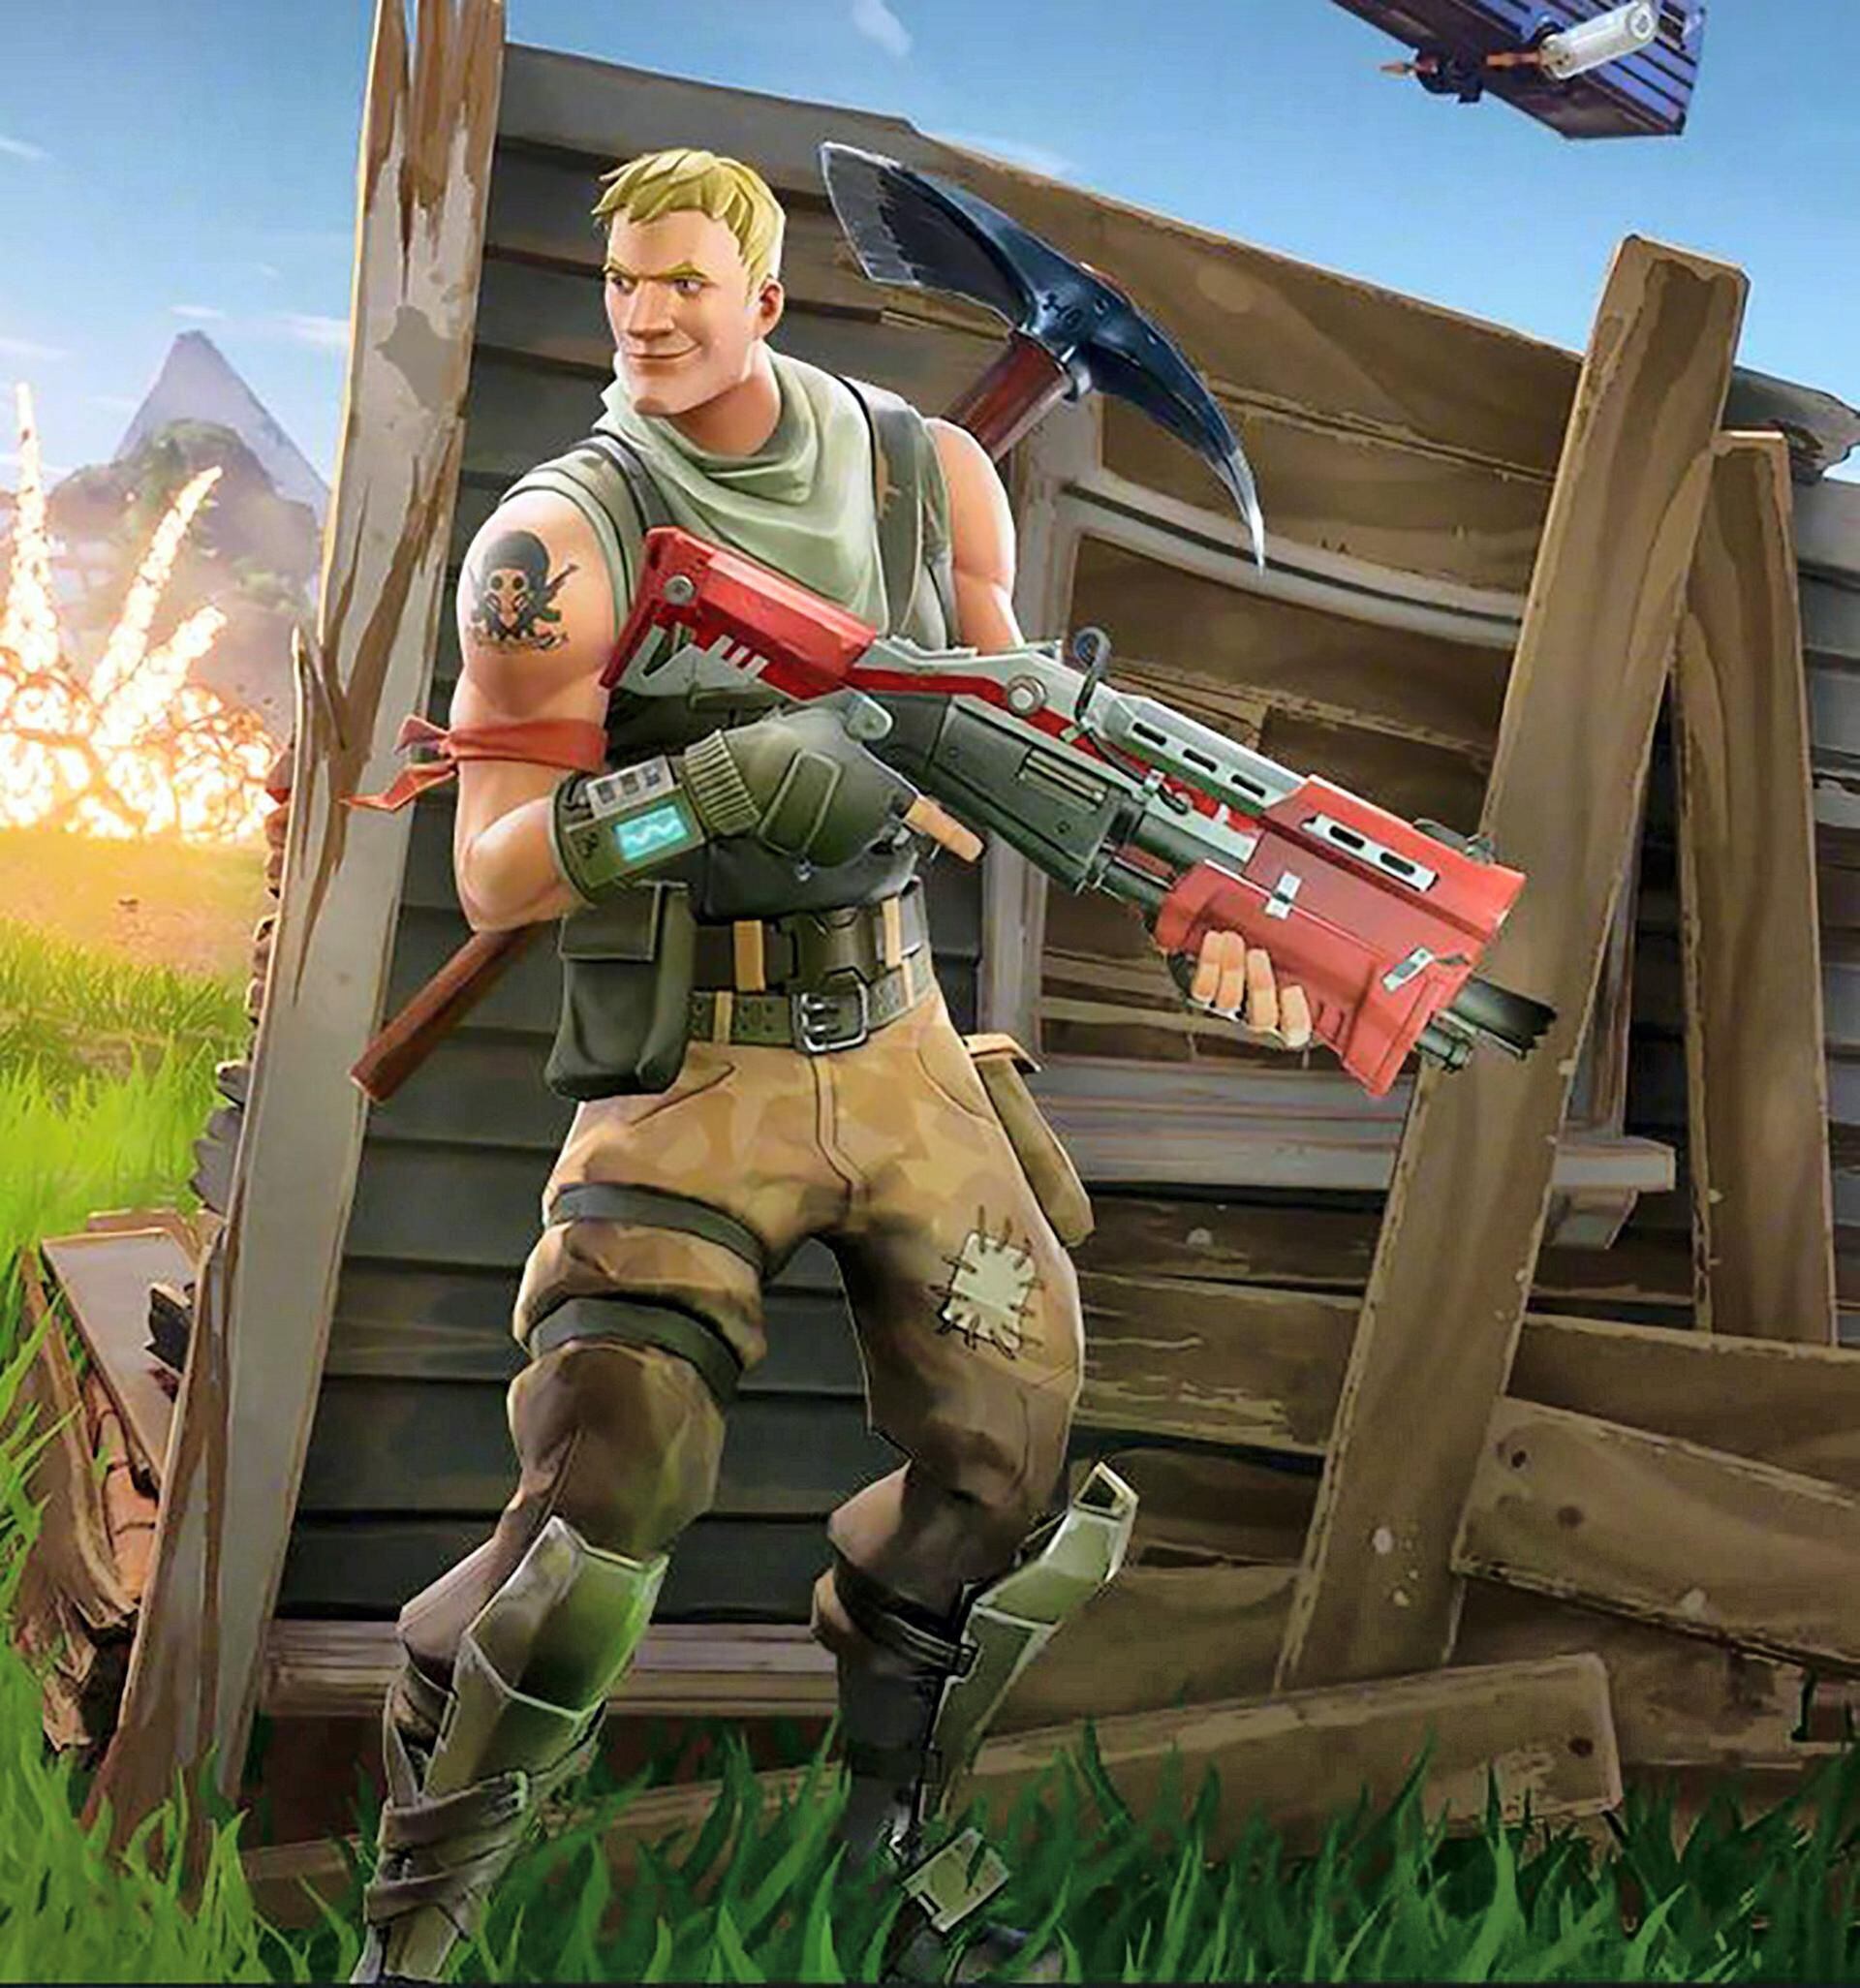 What Is Fortnite Game? Is Fortnite A Violent Game?